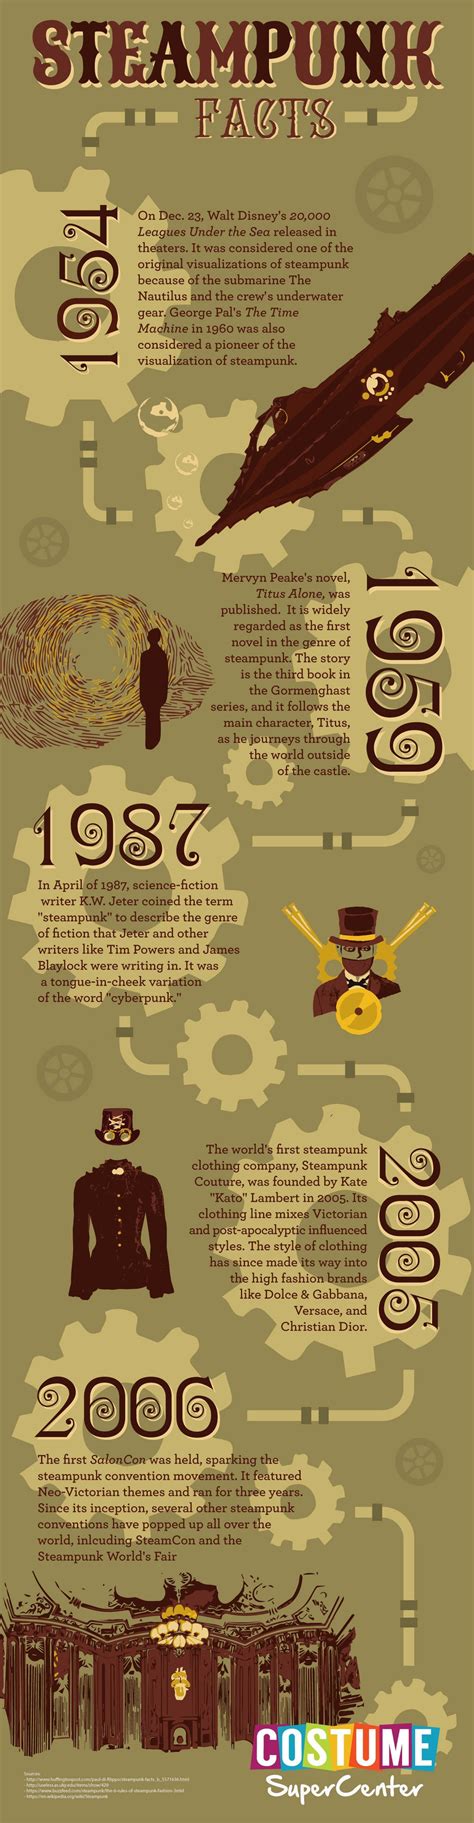 Steampunk Is A Cultural Phenomenon And This Infographic Traces The